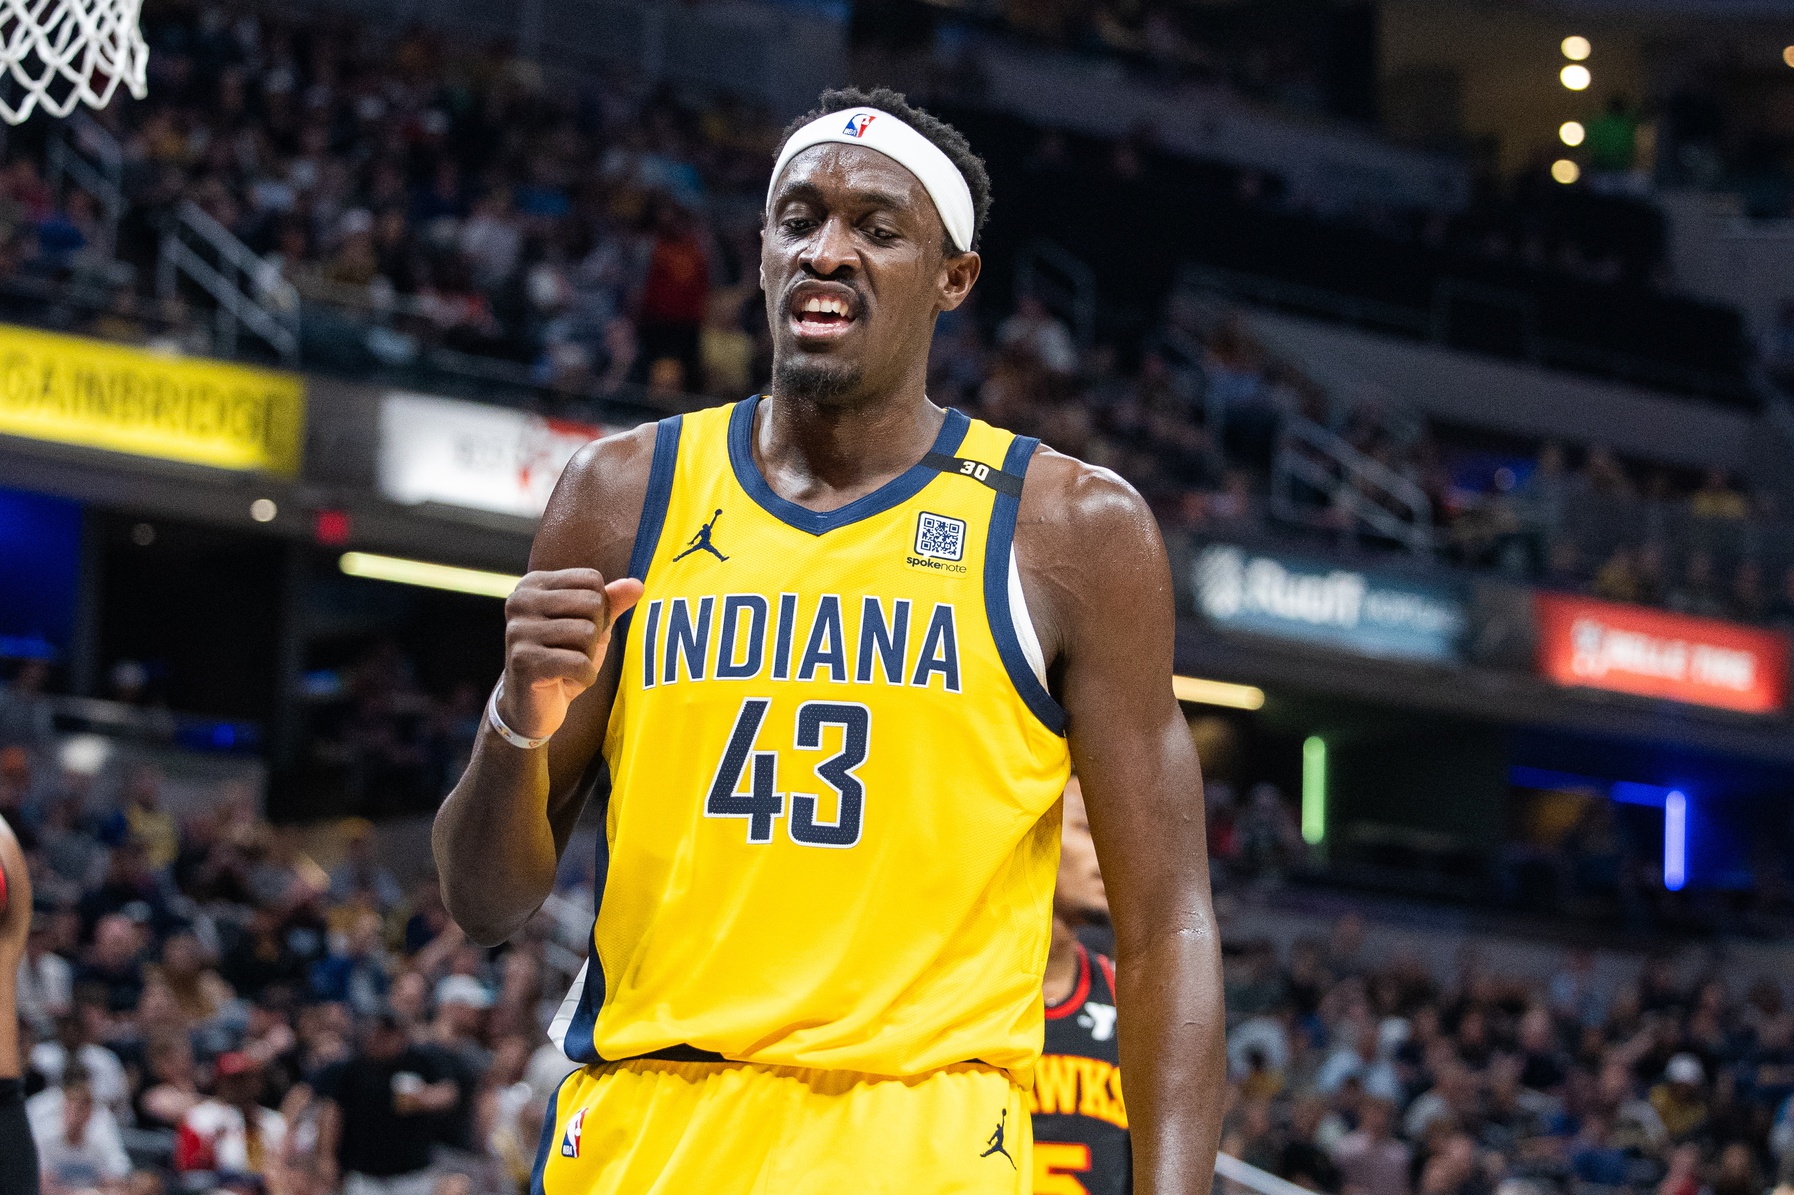 Siakam Leads Indiana Pacers to Game 2 Victory Against Bucks: Preview of Game 3 at Gainbridge Fieldhouse